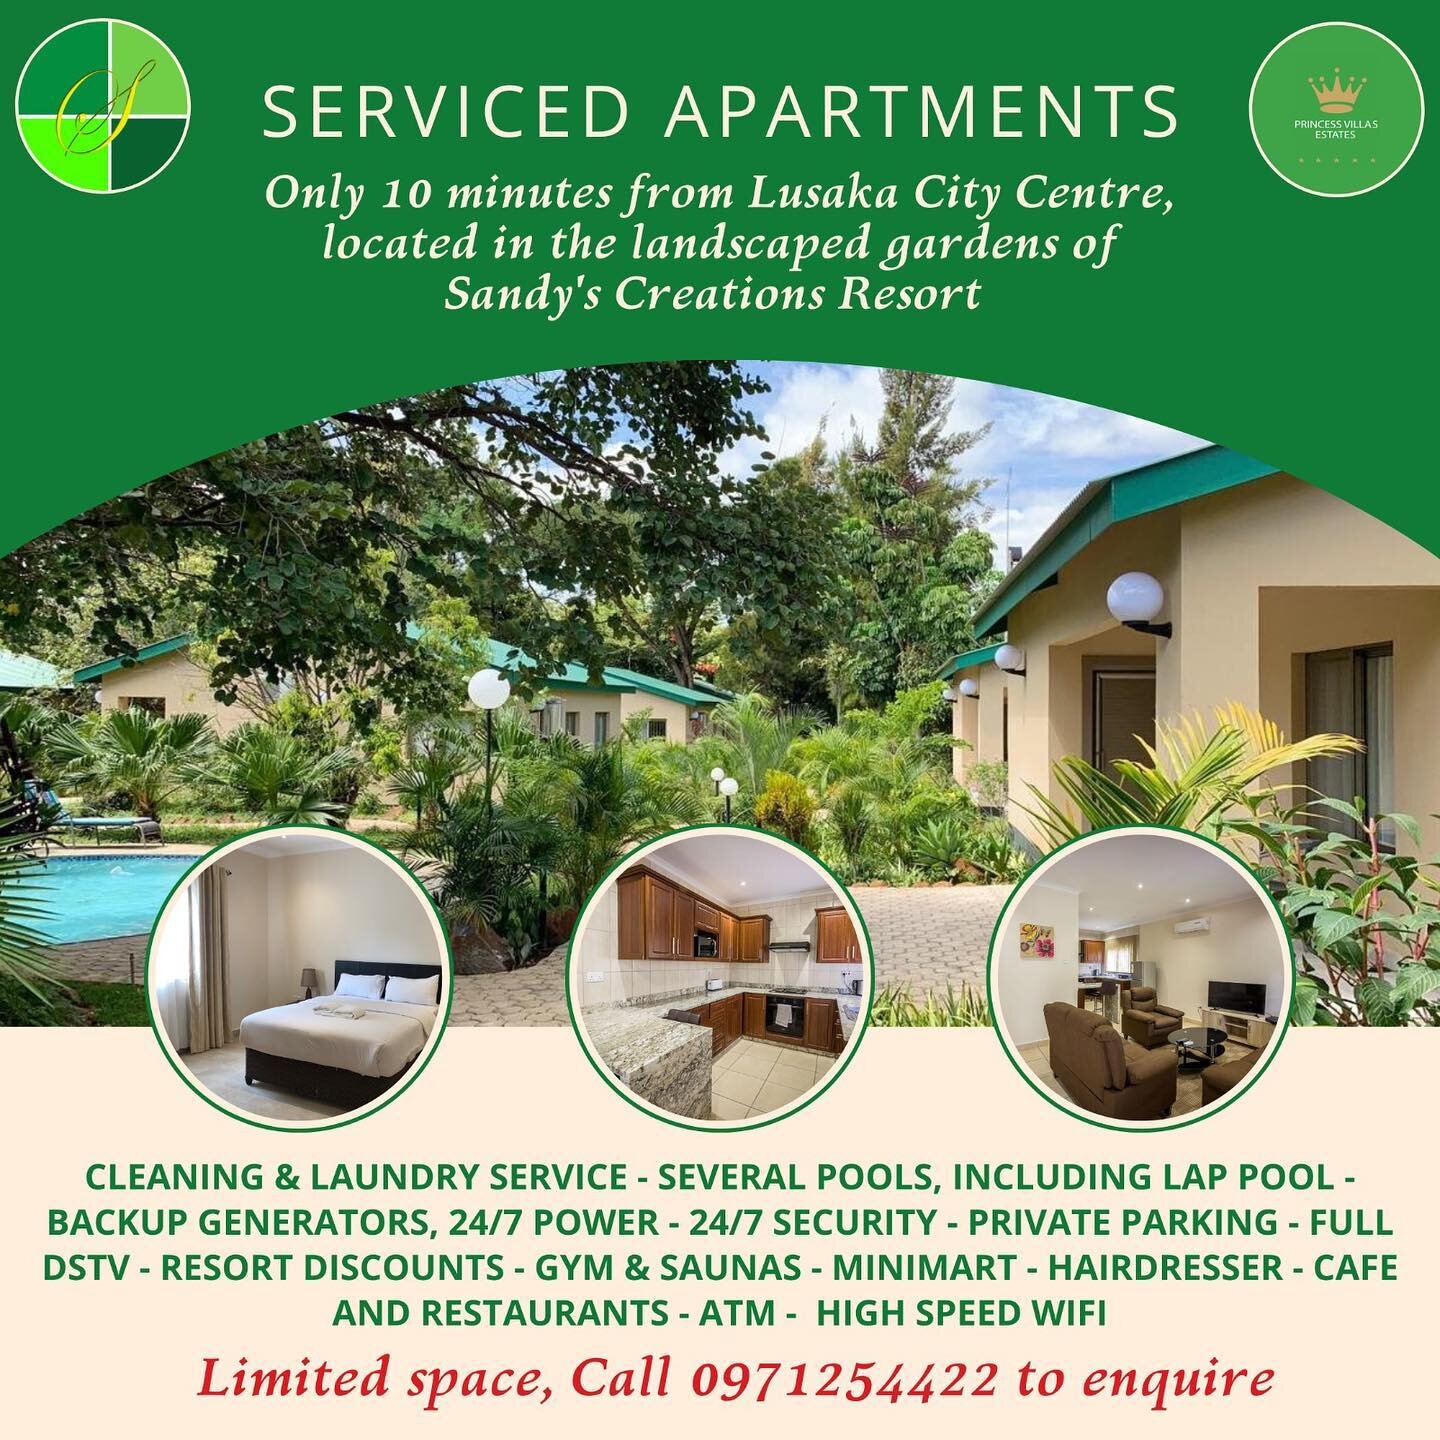 1 and 2 bedroom garden apartments situated in Sandy&rsquo;s Creations Resort&hellip; now available to rent. Hurry, only a few apartments available! 

Why choose us? We are fully serviced, daily cleaning and laundry service, 24/7 power, 24/7 security,